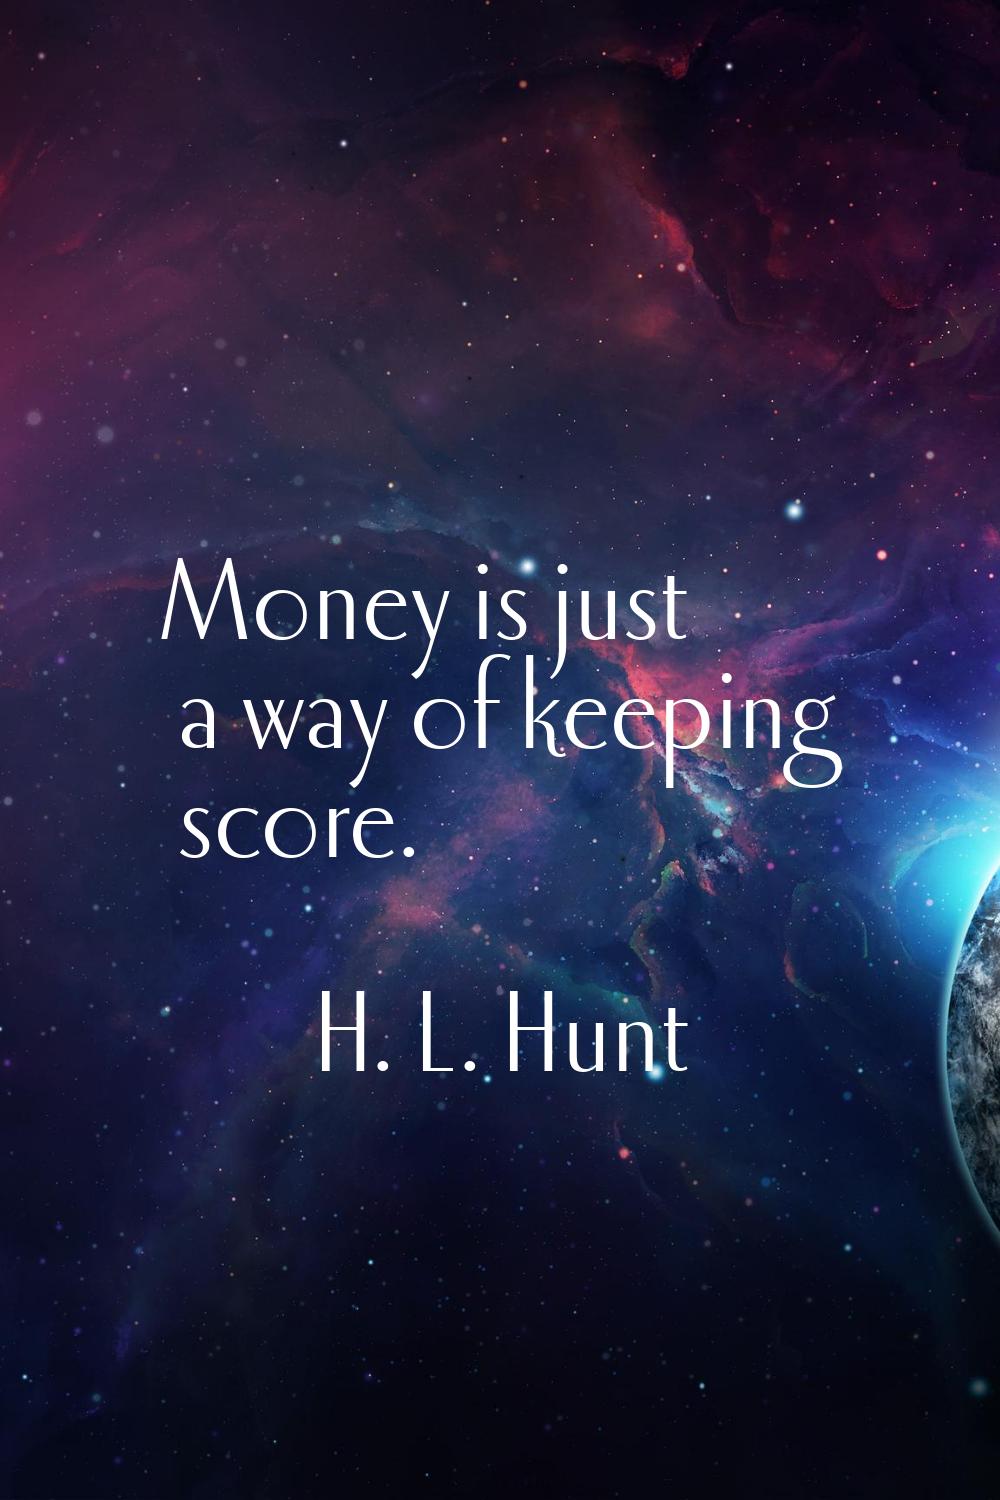 Money is just a way of keeping score.